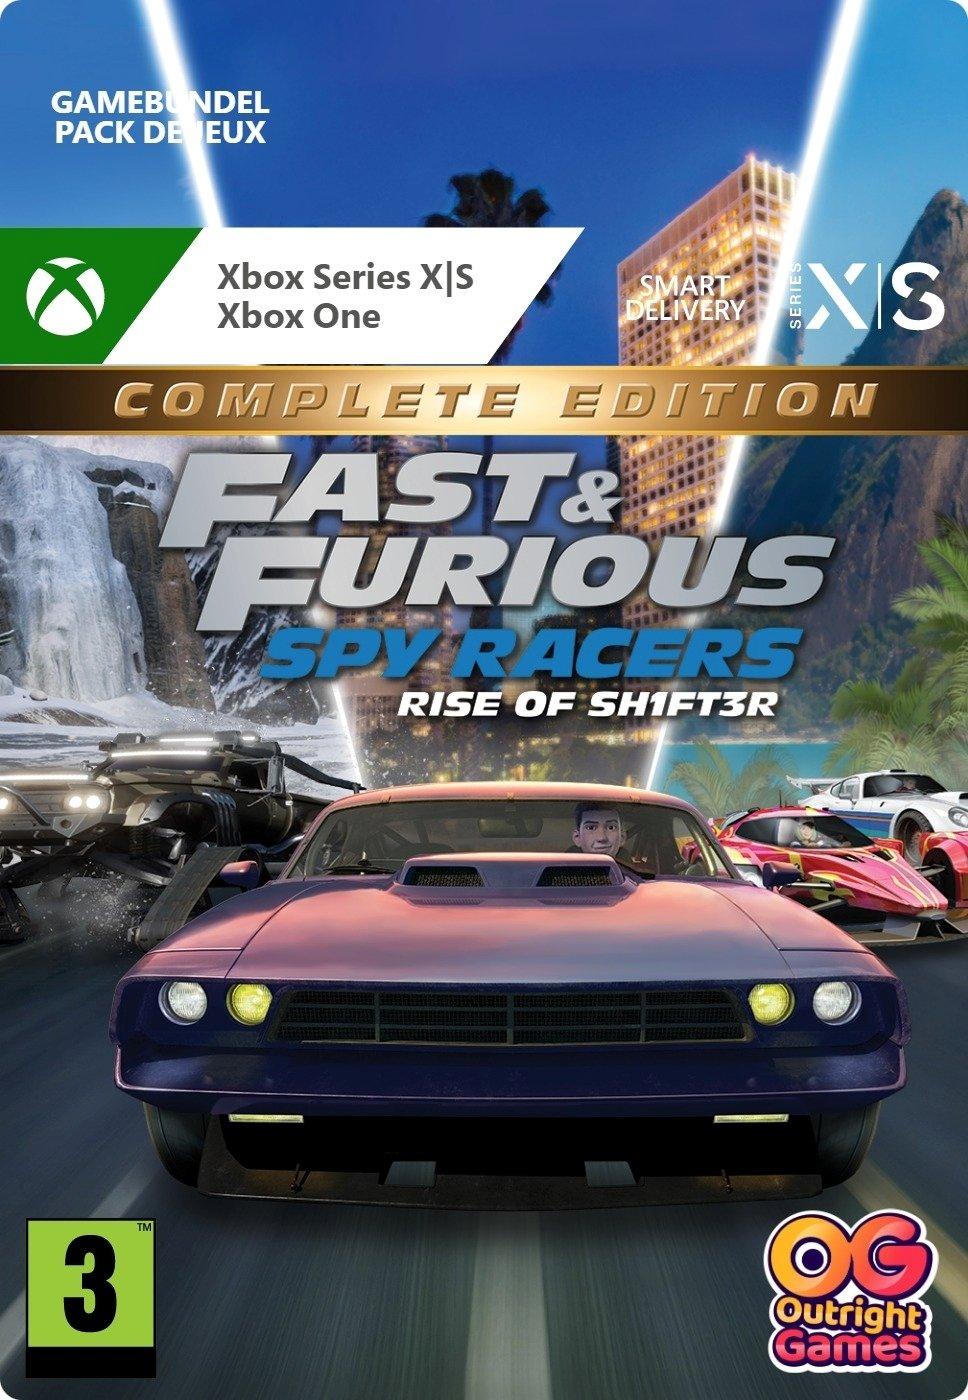 Fast & Furious: Spy Racers Rise of SH1FT3R Complete Edition - Xbox Series X/Xbox One - Bundle | G3Q-01400 (36ef0d1c-f8c0-1745-86af-4c3db70315c5)